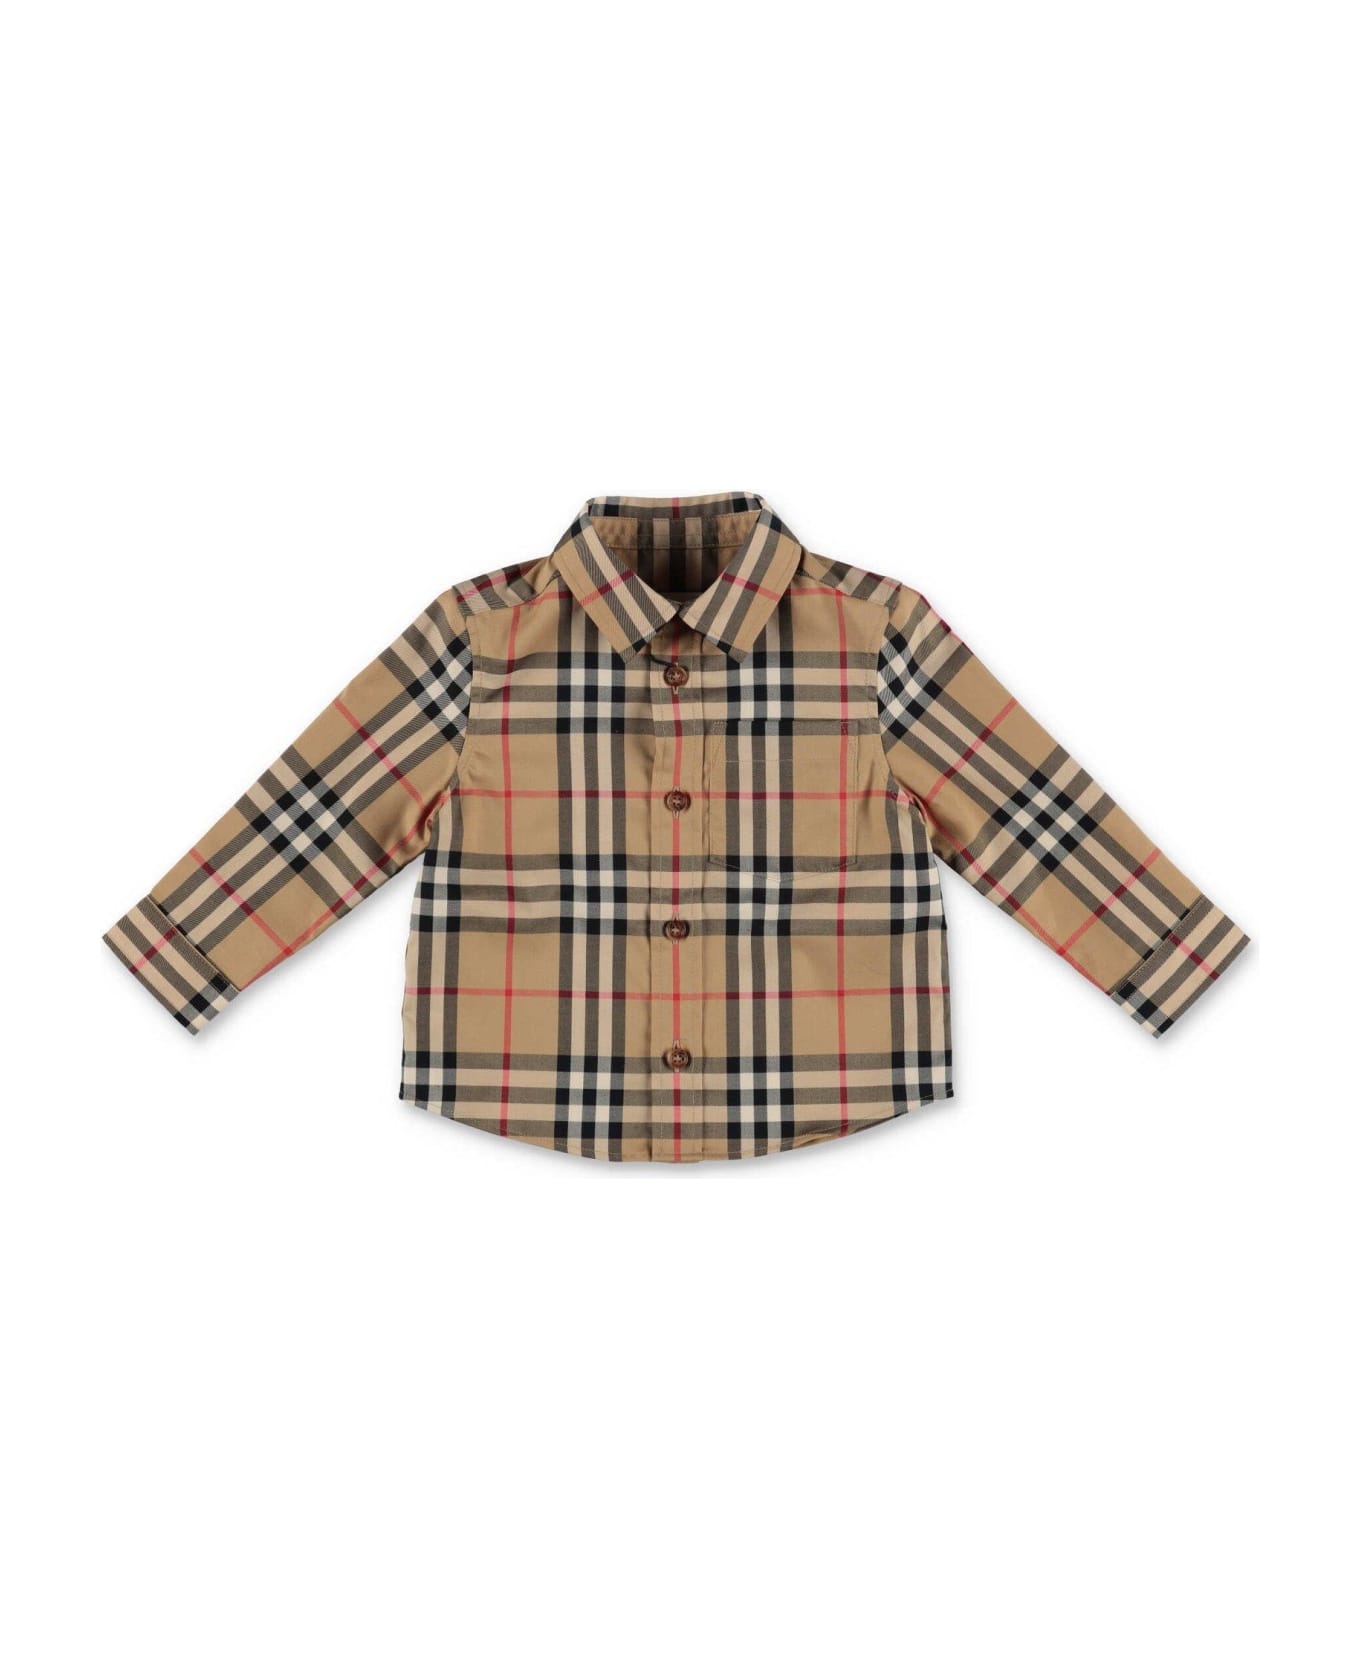 Burberry Checked Long-sleeved Shirt - Burberry White Sweatshirt For Girl With Iconic Bear